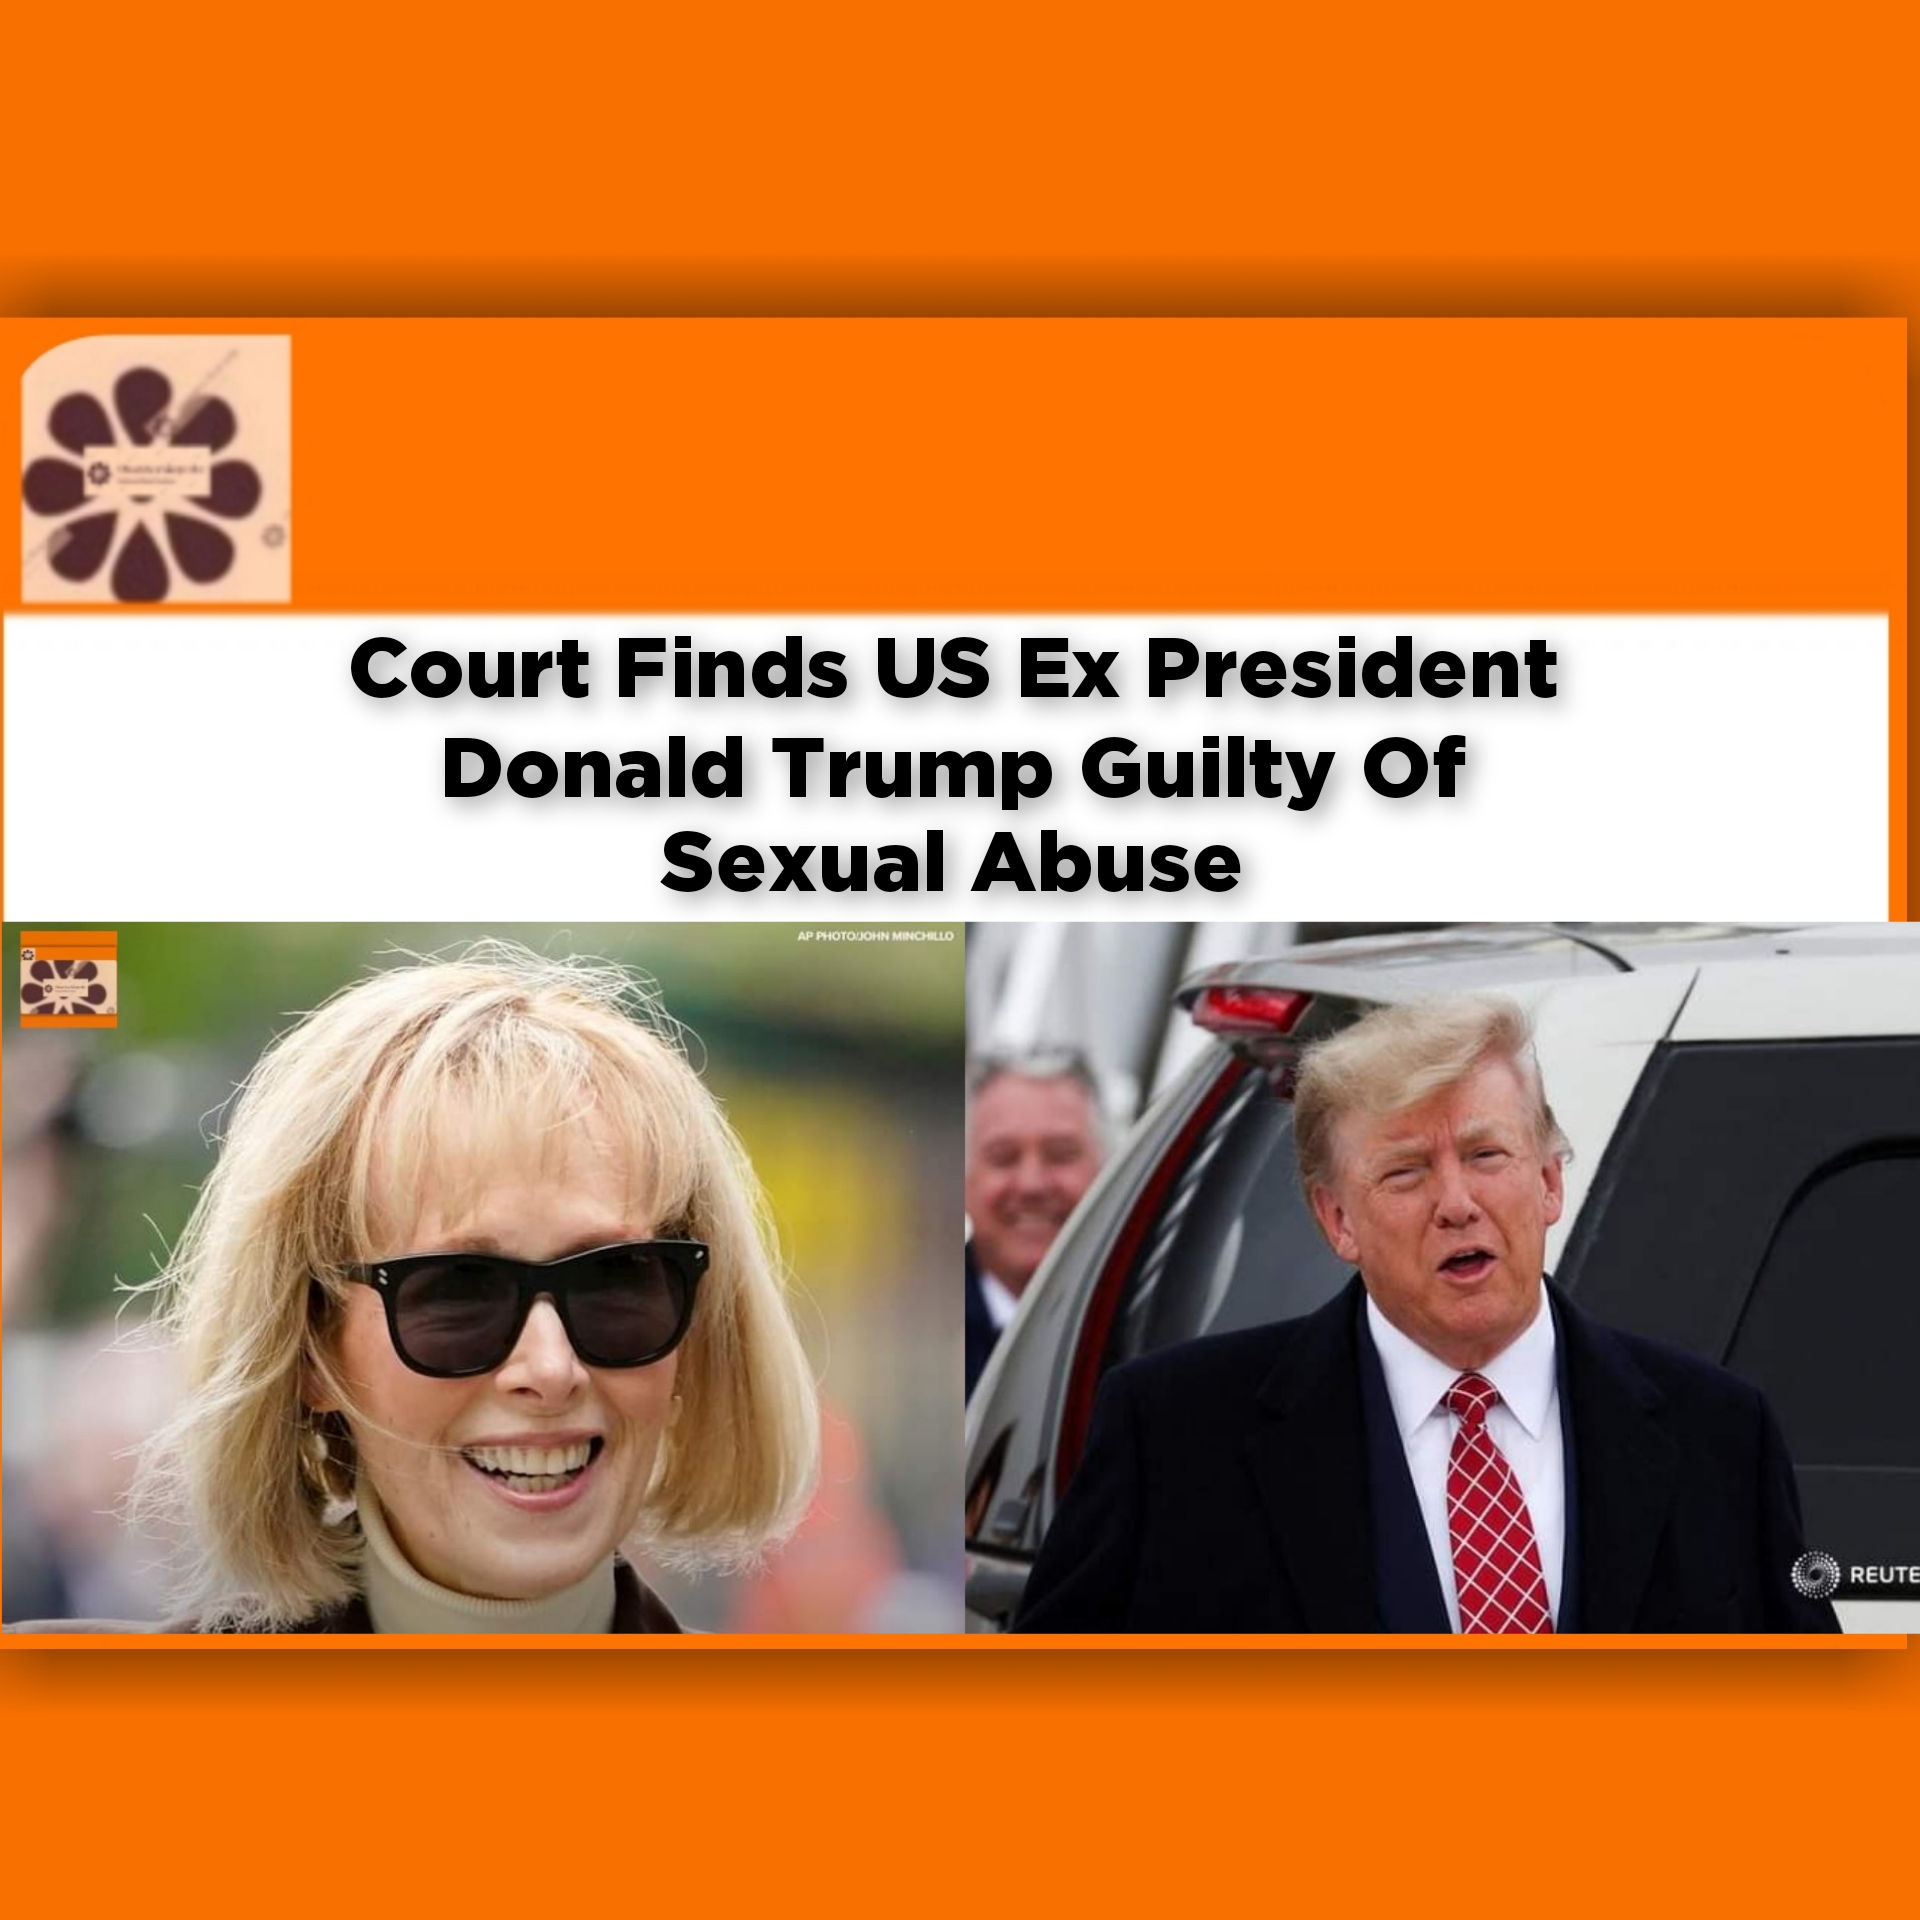 Court Finds US Ex President Donald Trump Guilty Of Sexual Abuse ~ OsazuwaAkonedo #breaking #Carroll #Donald #Jean #President #Trump